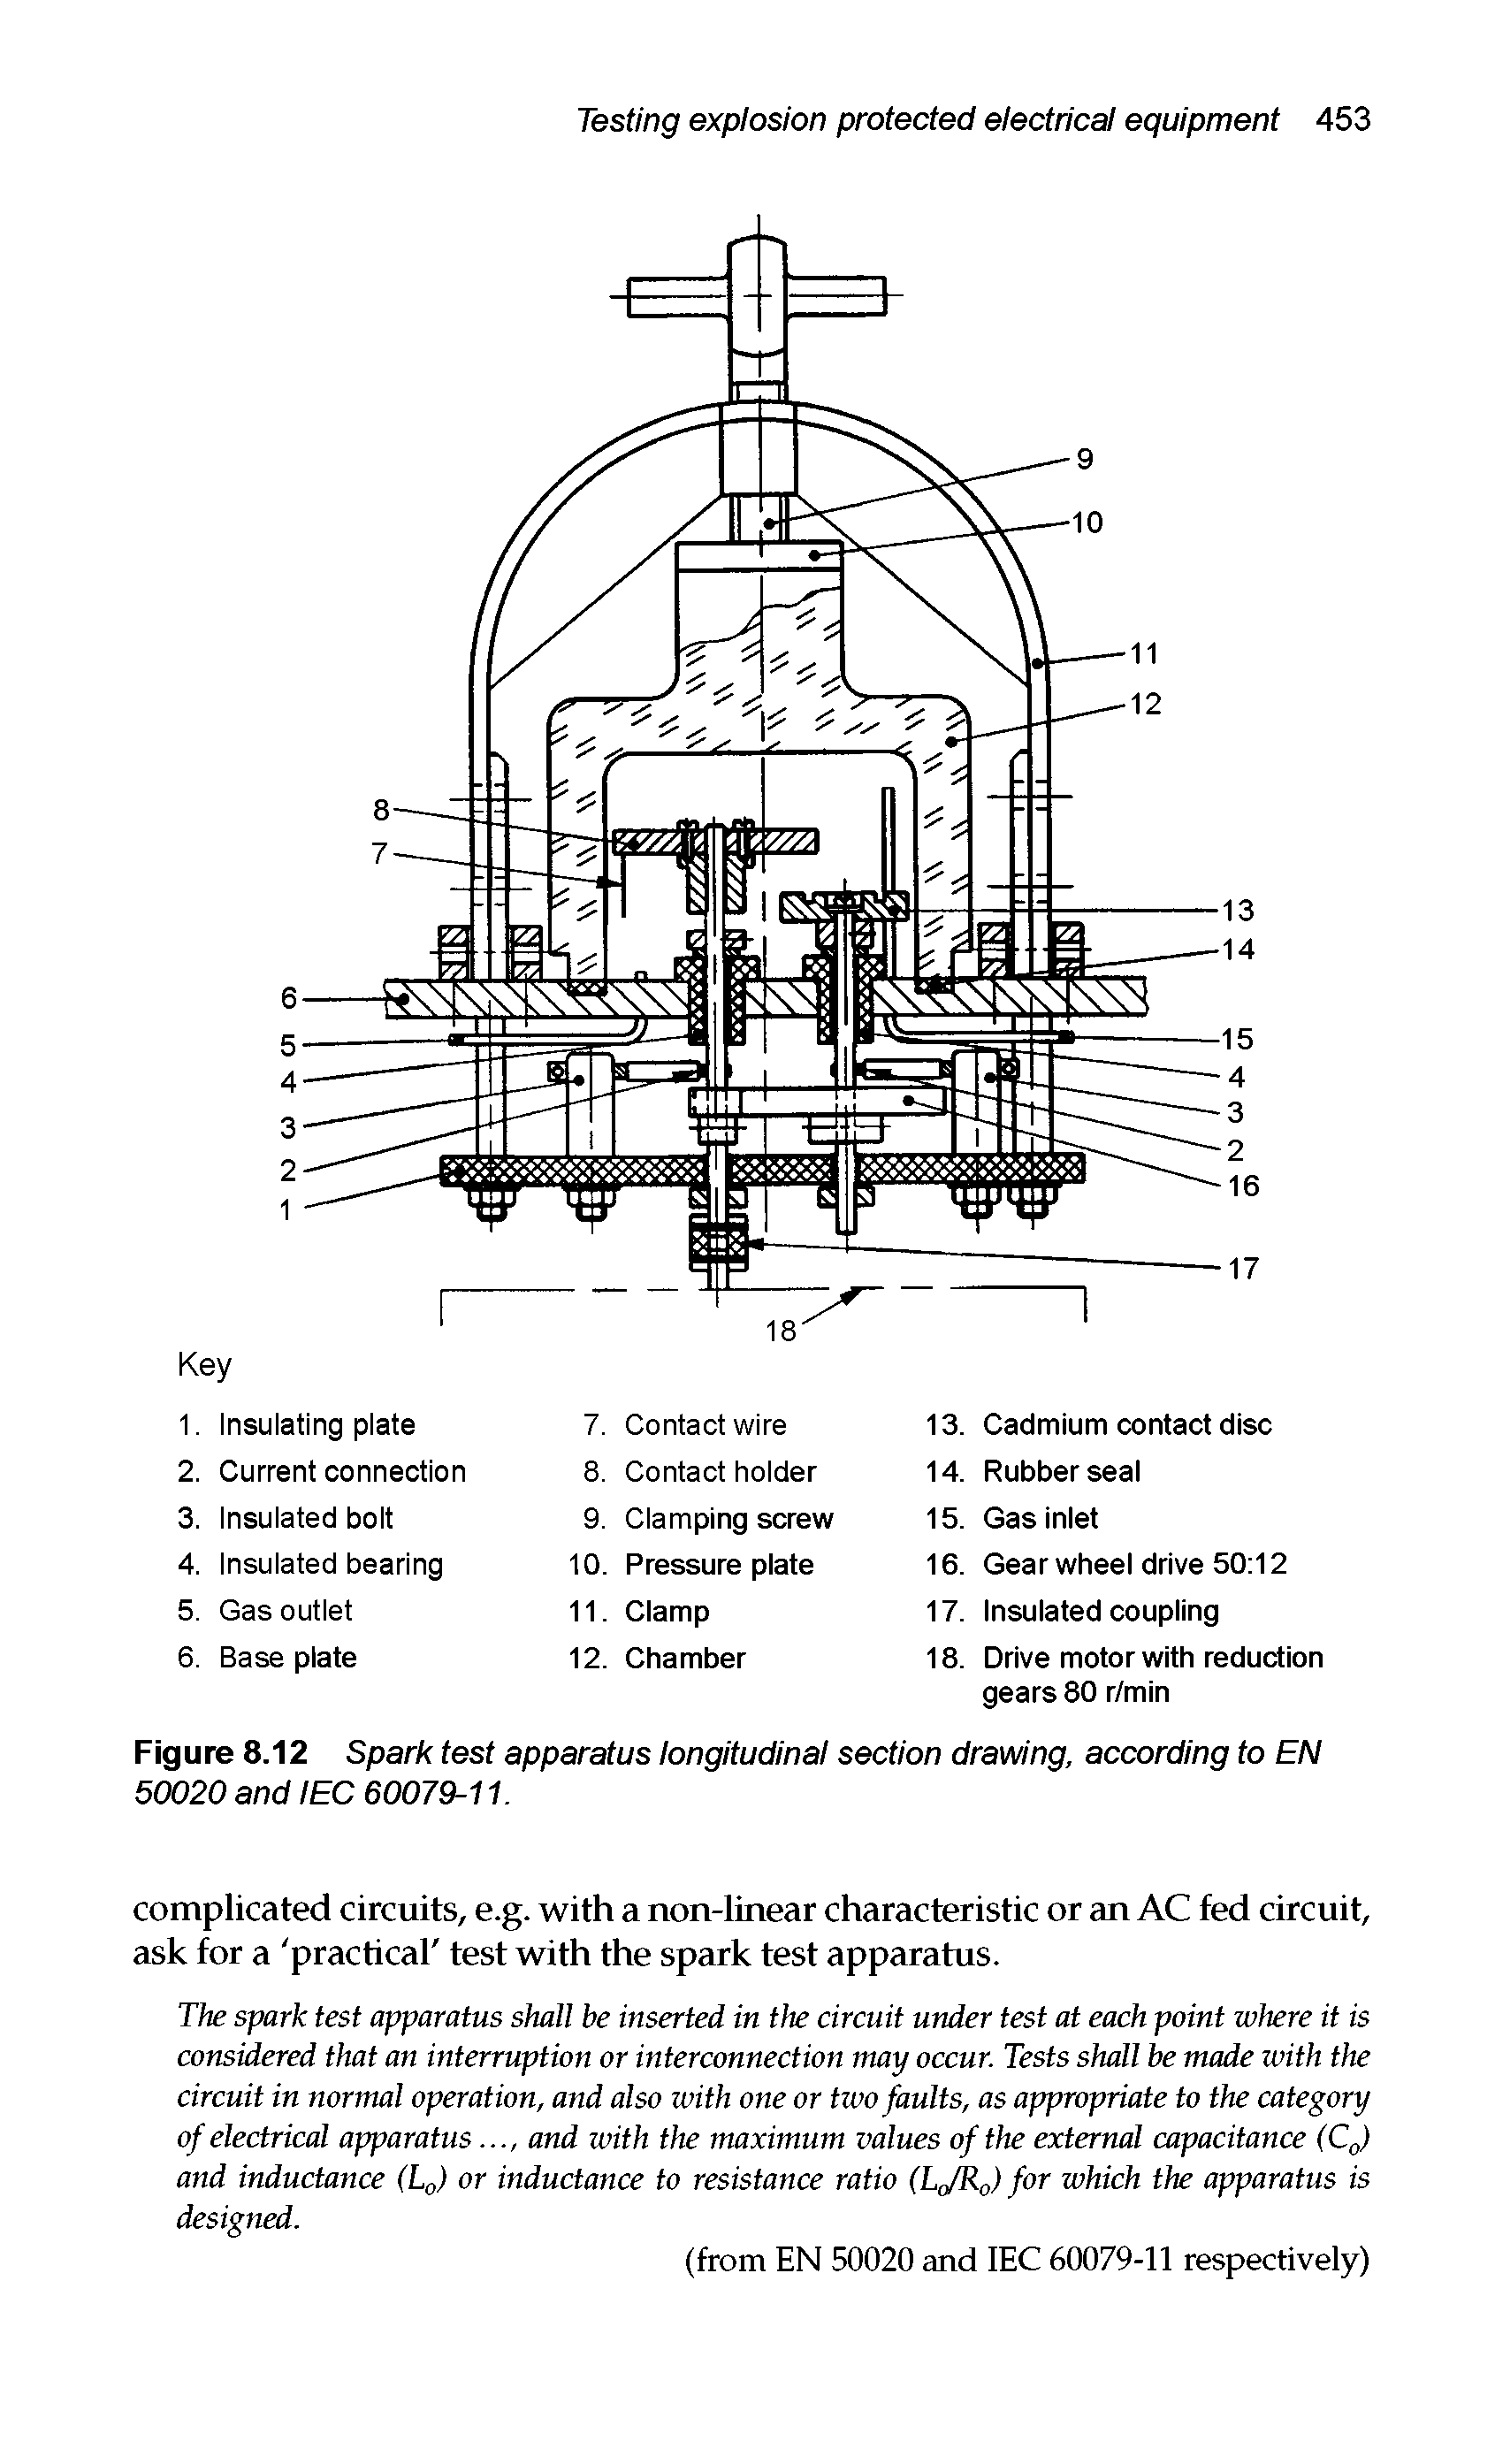 Figure 8.12 Spark test apparatus longitudinal section drawing, according to EN 50020 and IEC 60079-11.